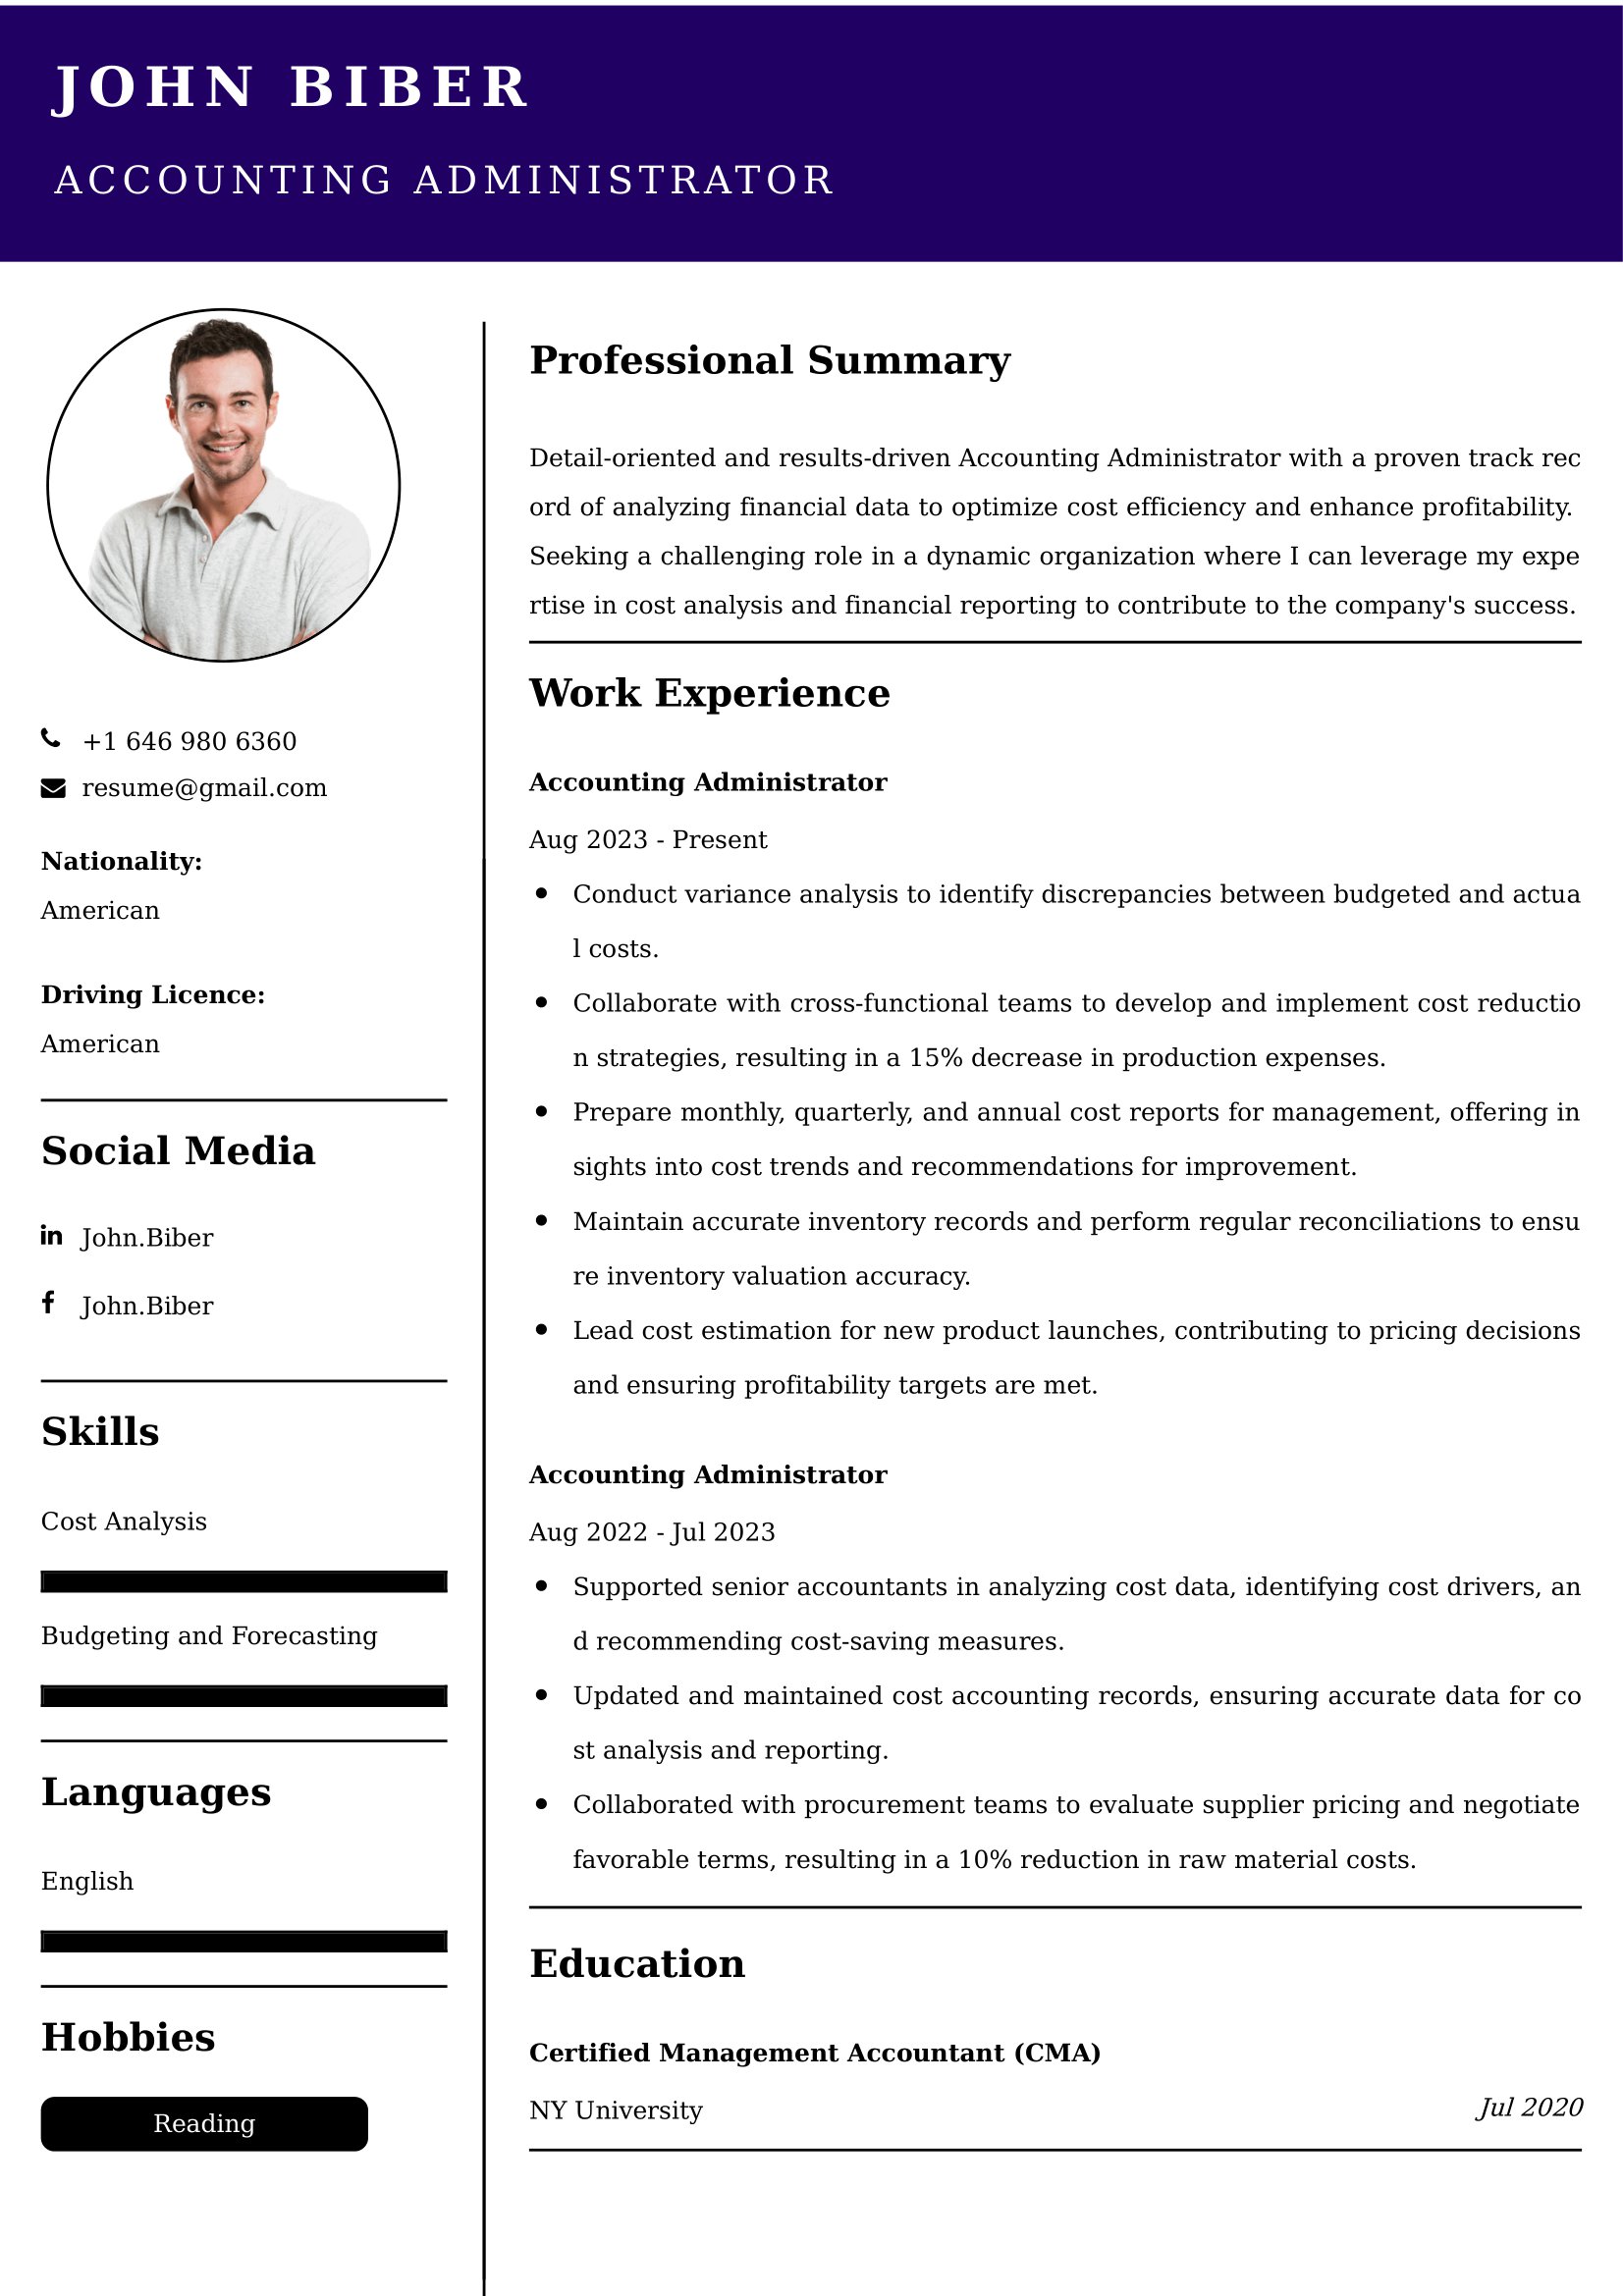 Accounting Administrator Resume Examples - Brazilian Format, Latest Template